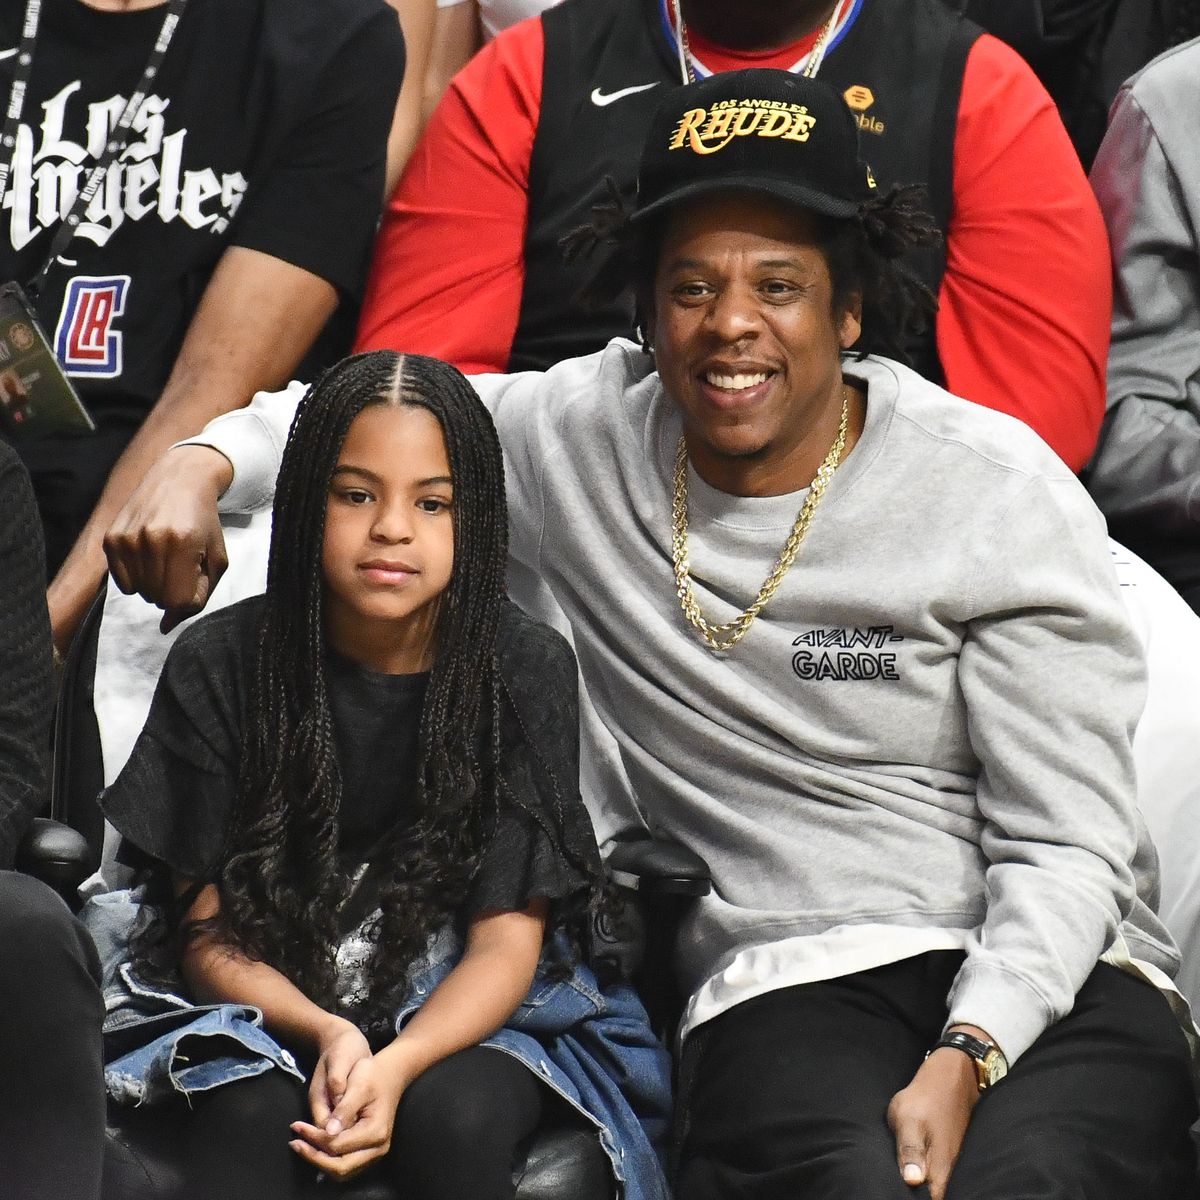 Blue Ivy Carter Helped Induct Her Jay-Z Into the Hall of Fame